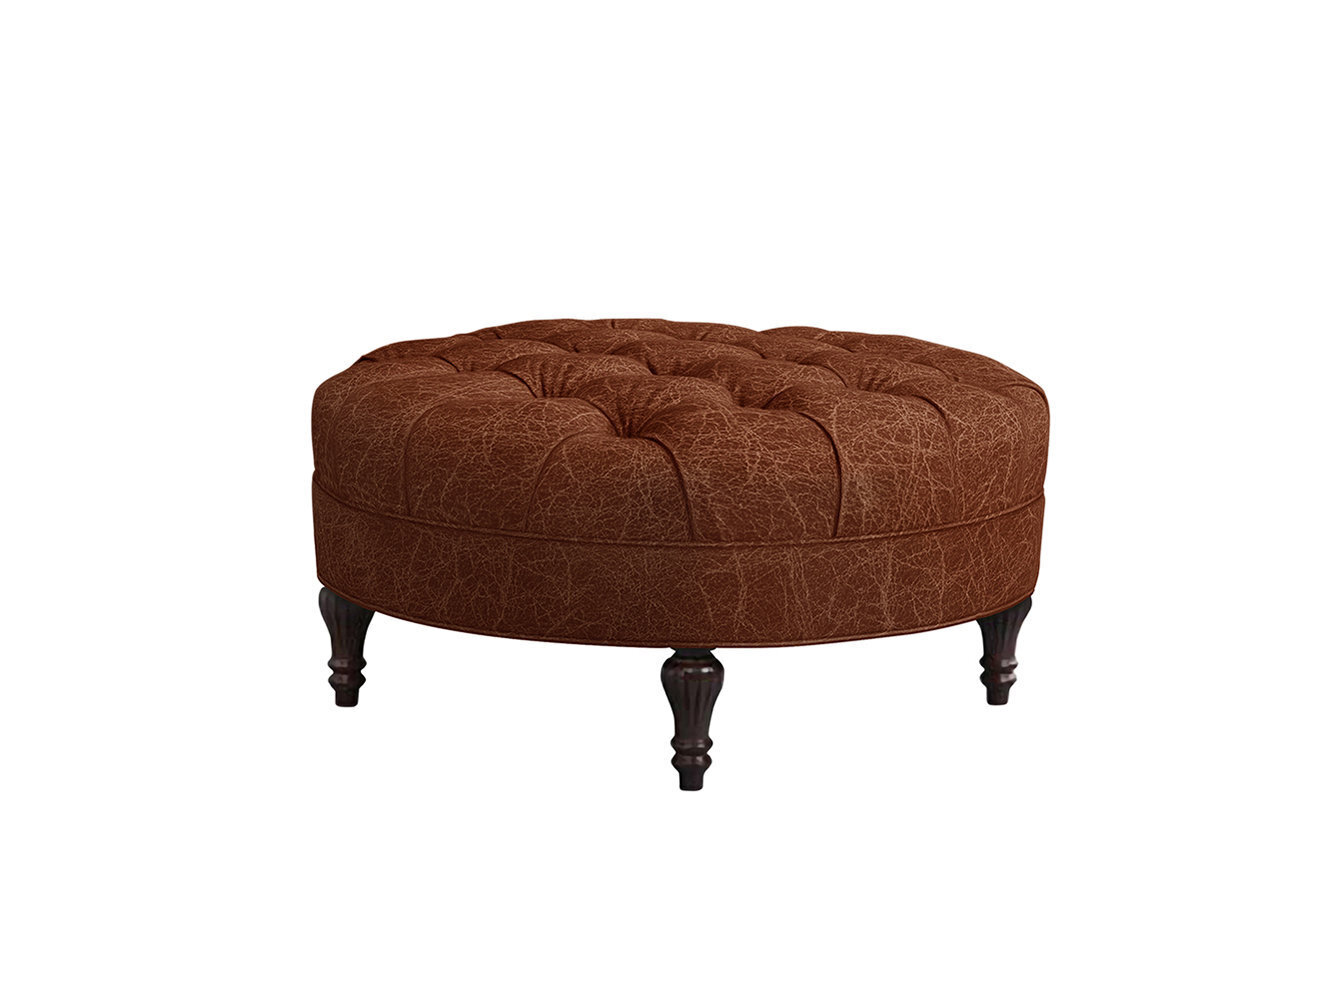 Leather Round Tufted Ottoman With Legs